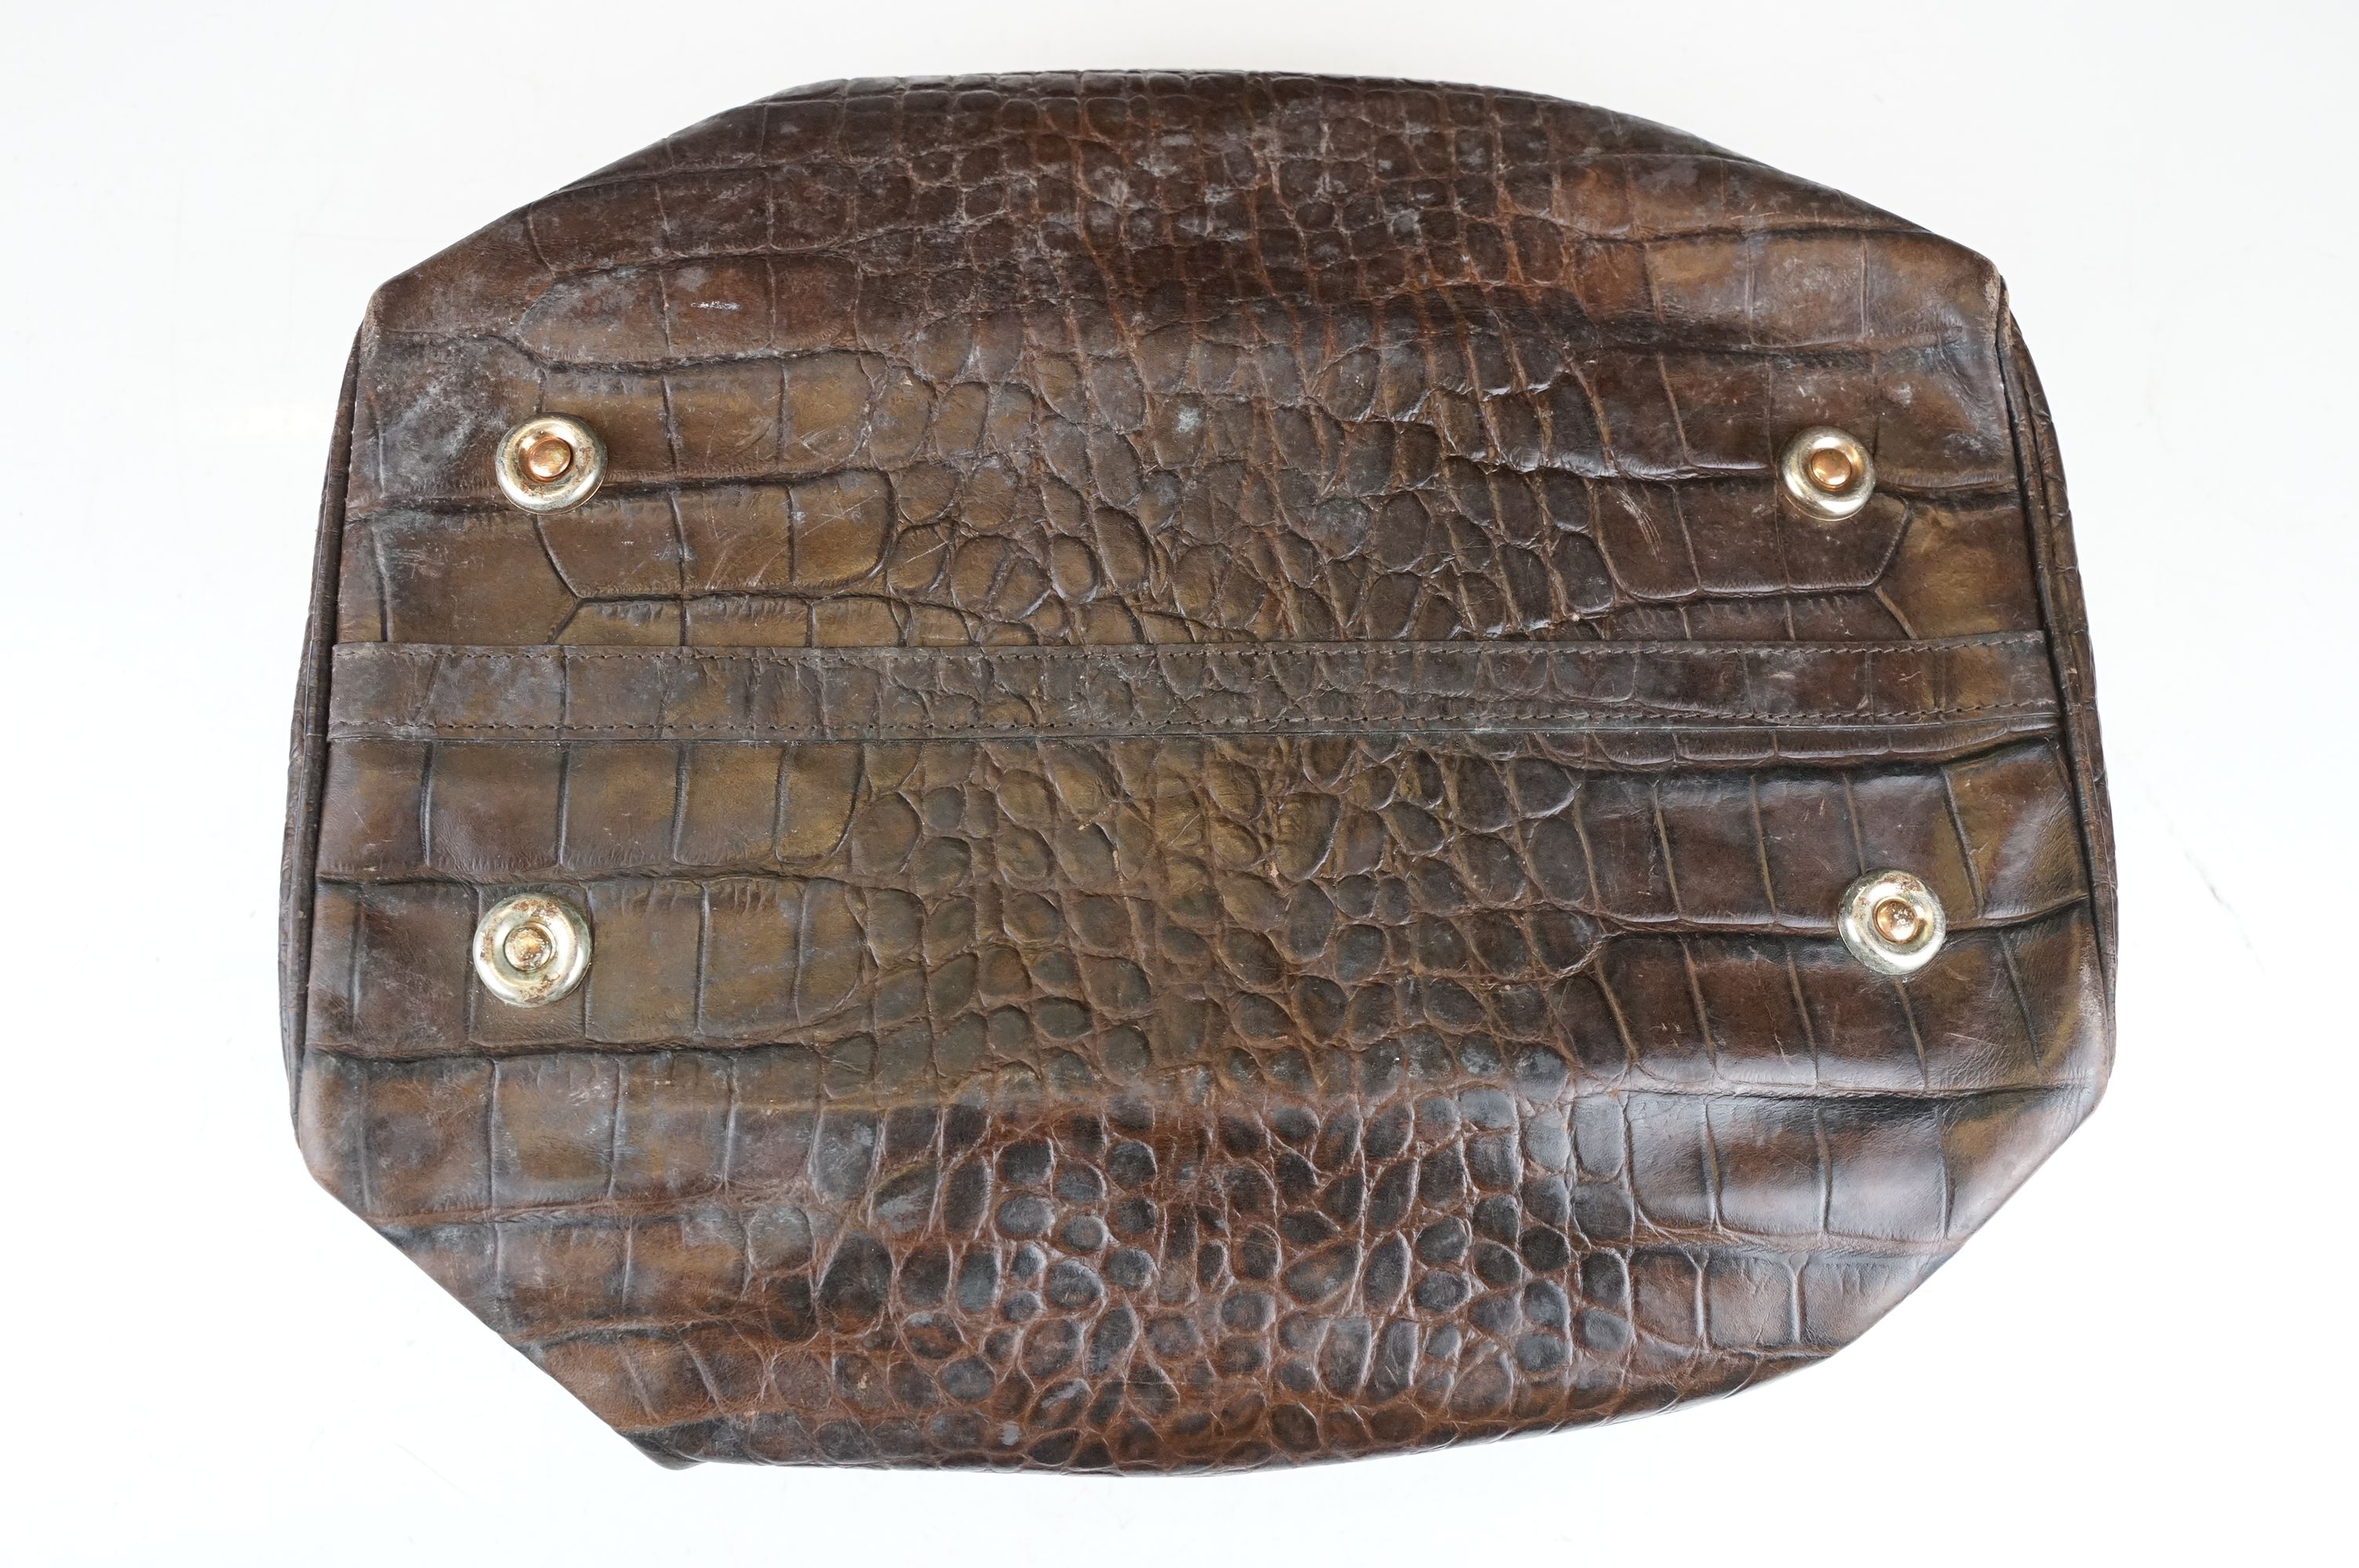 Mulberry dark brown leather crocodile effect handbag, with Mulberry storage bag, 20cm high x 35cm - Image 7 of 12